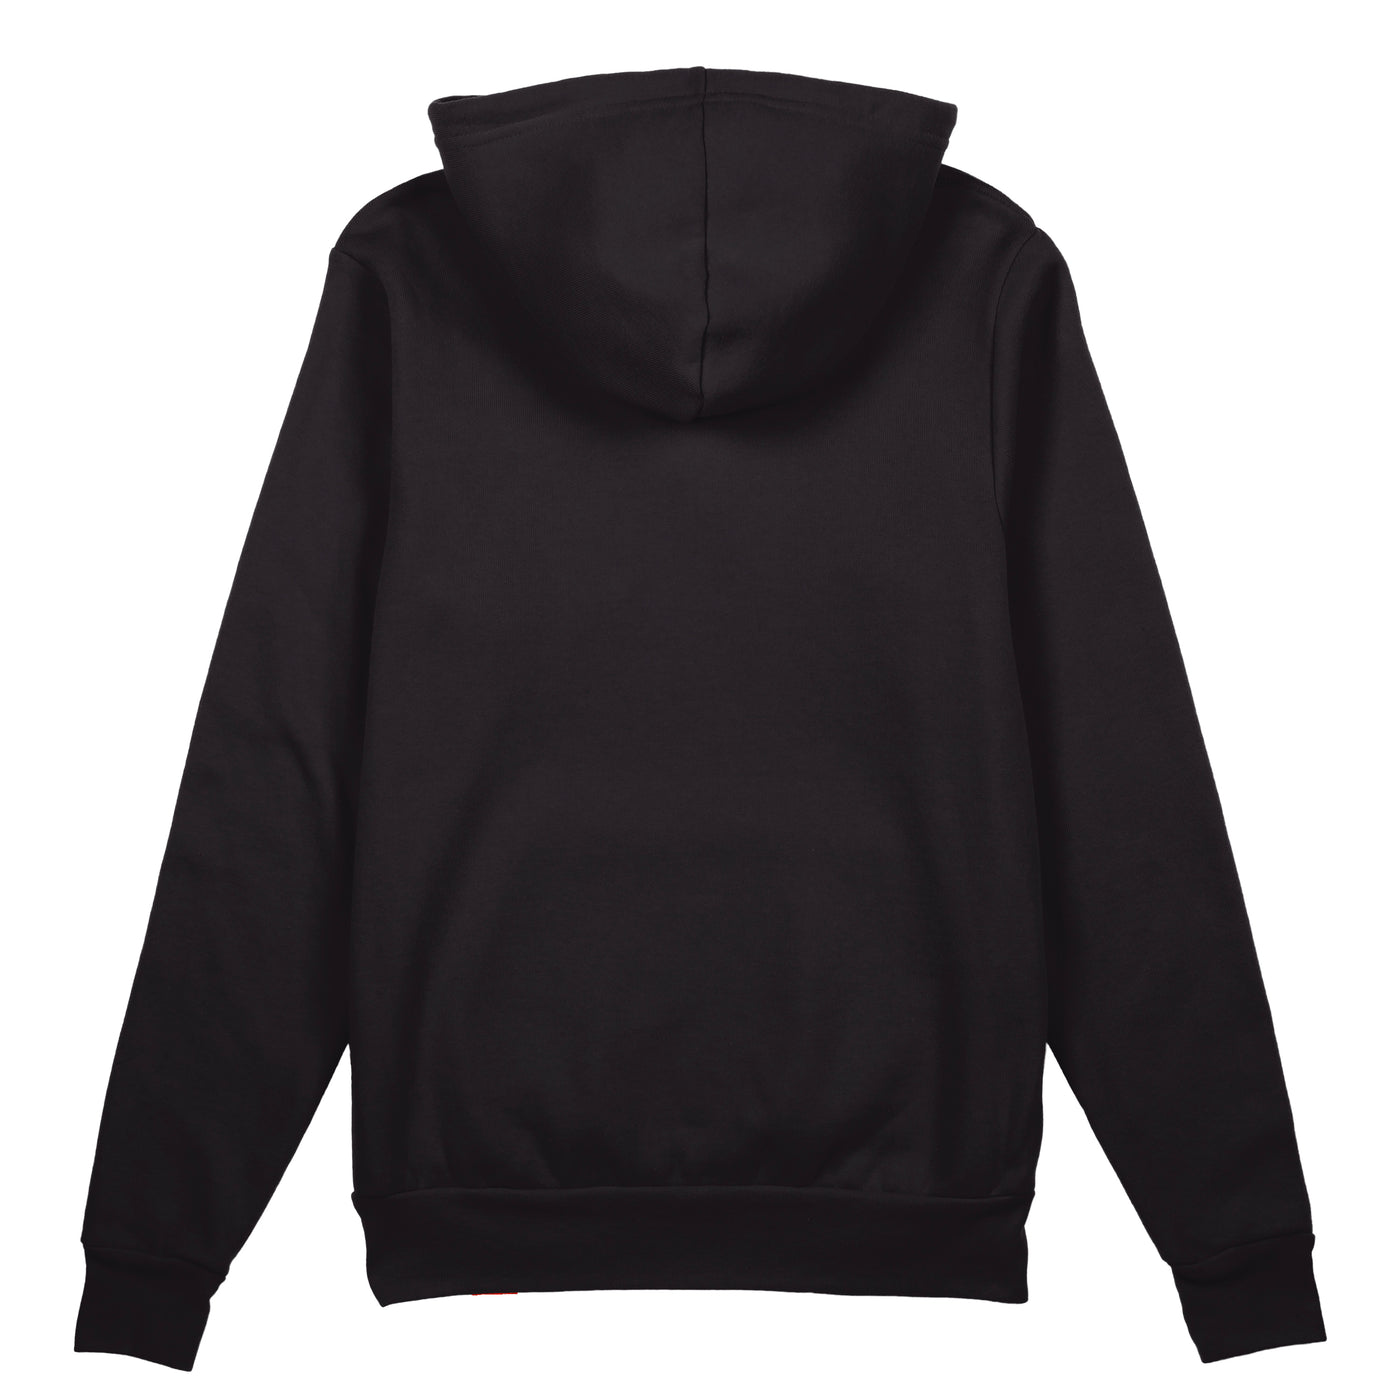 CORE Action Sports Hoodie – Black/White